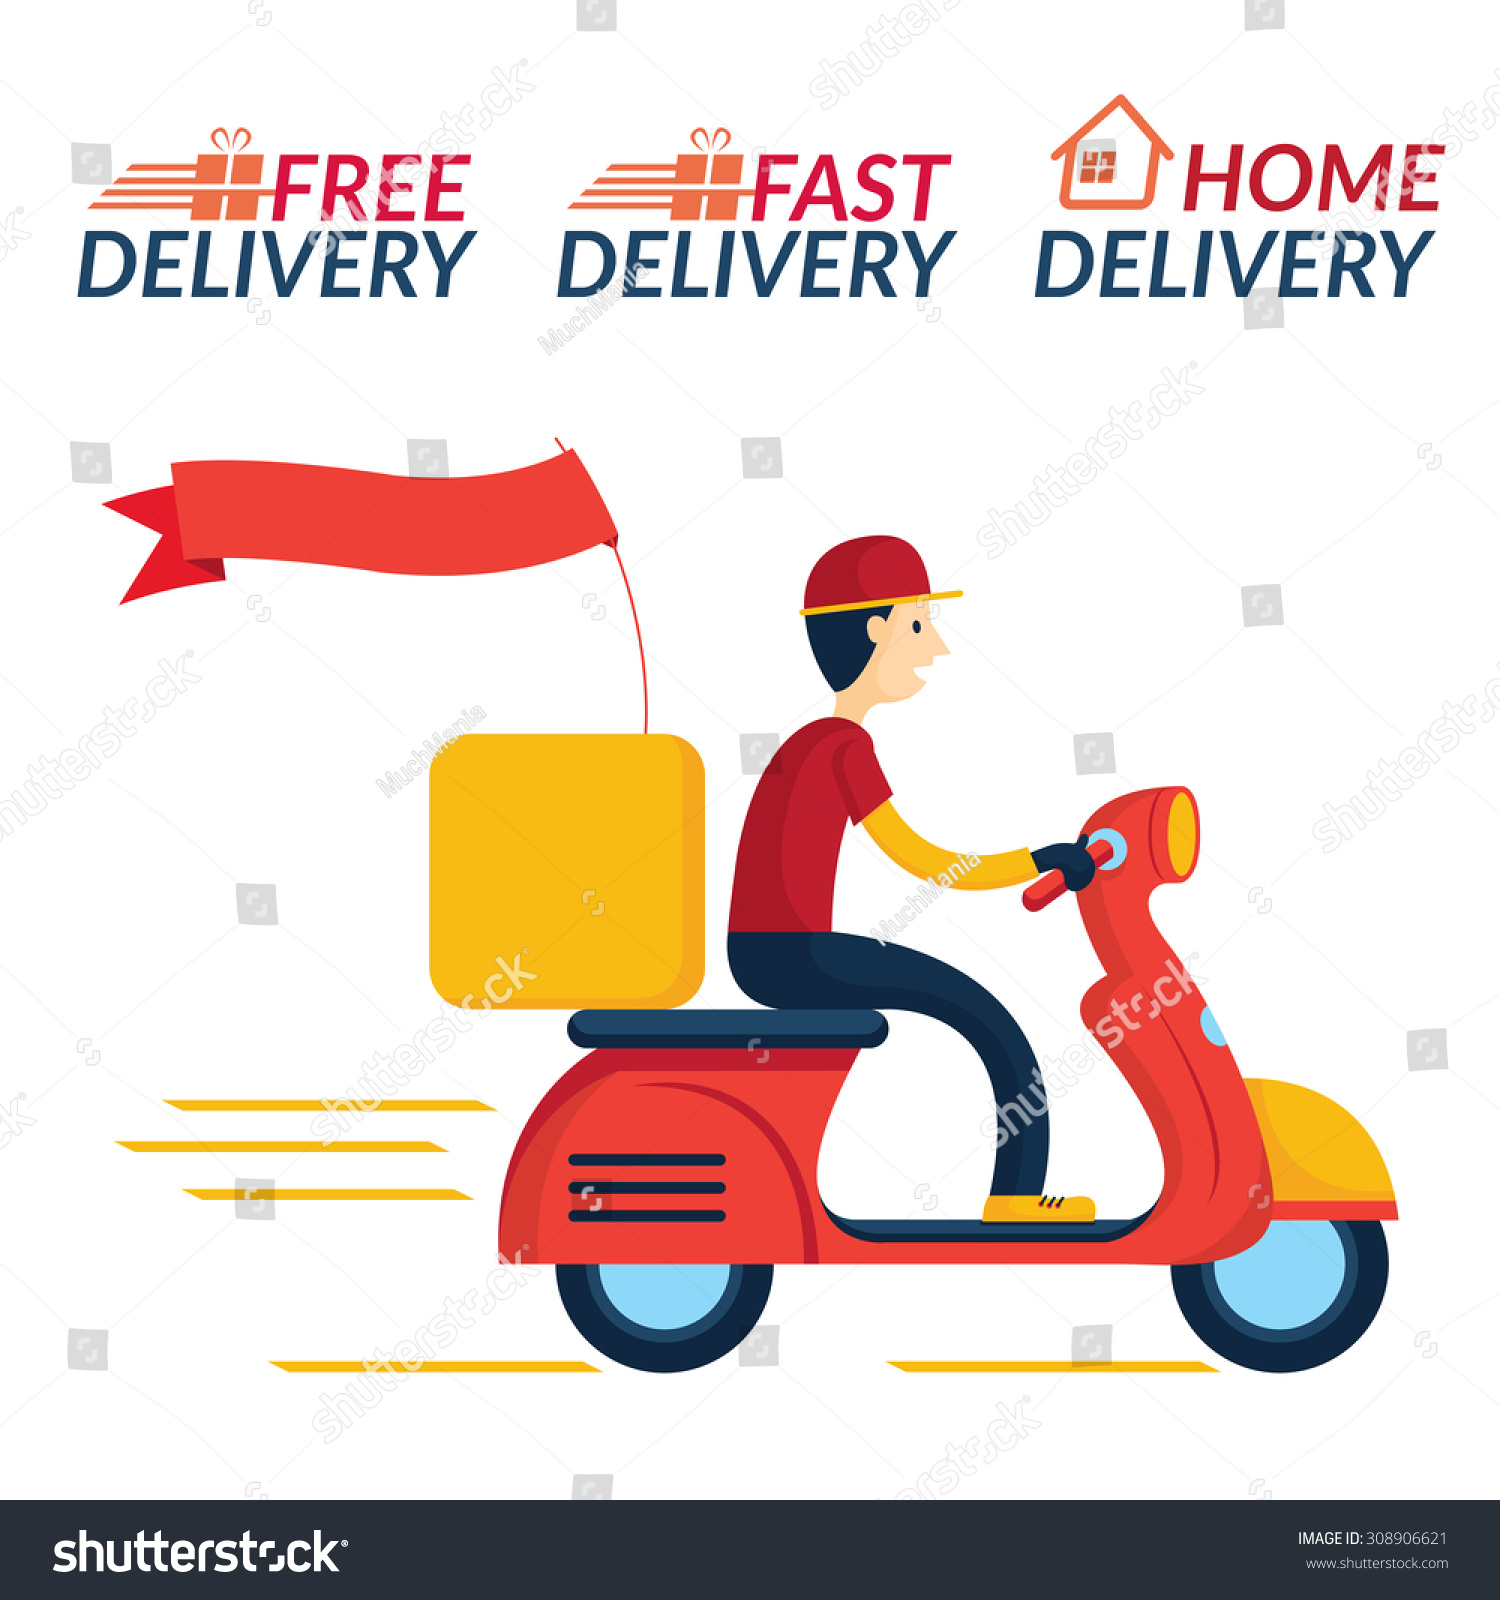 home delivery clipart - photo #19